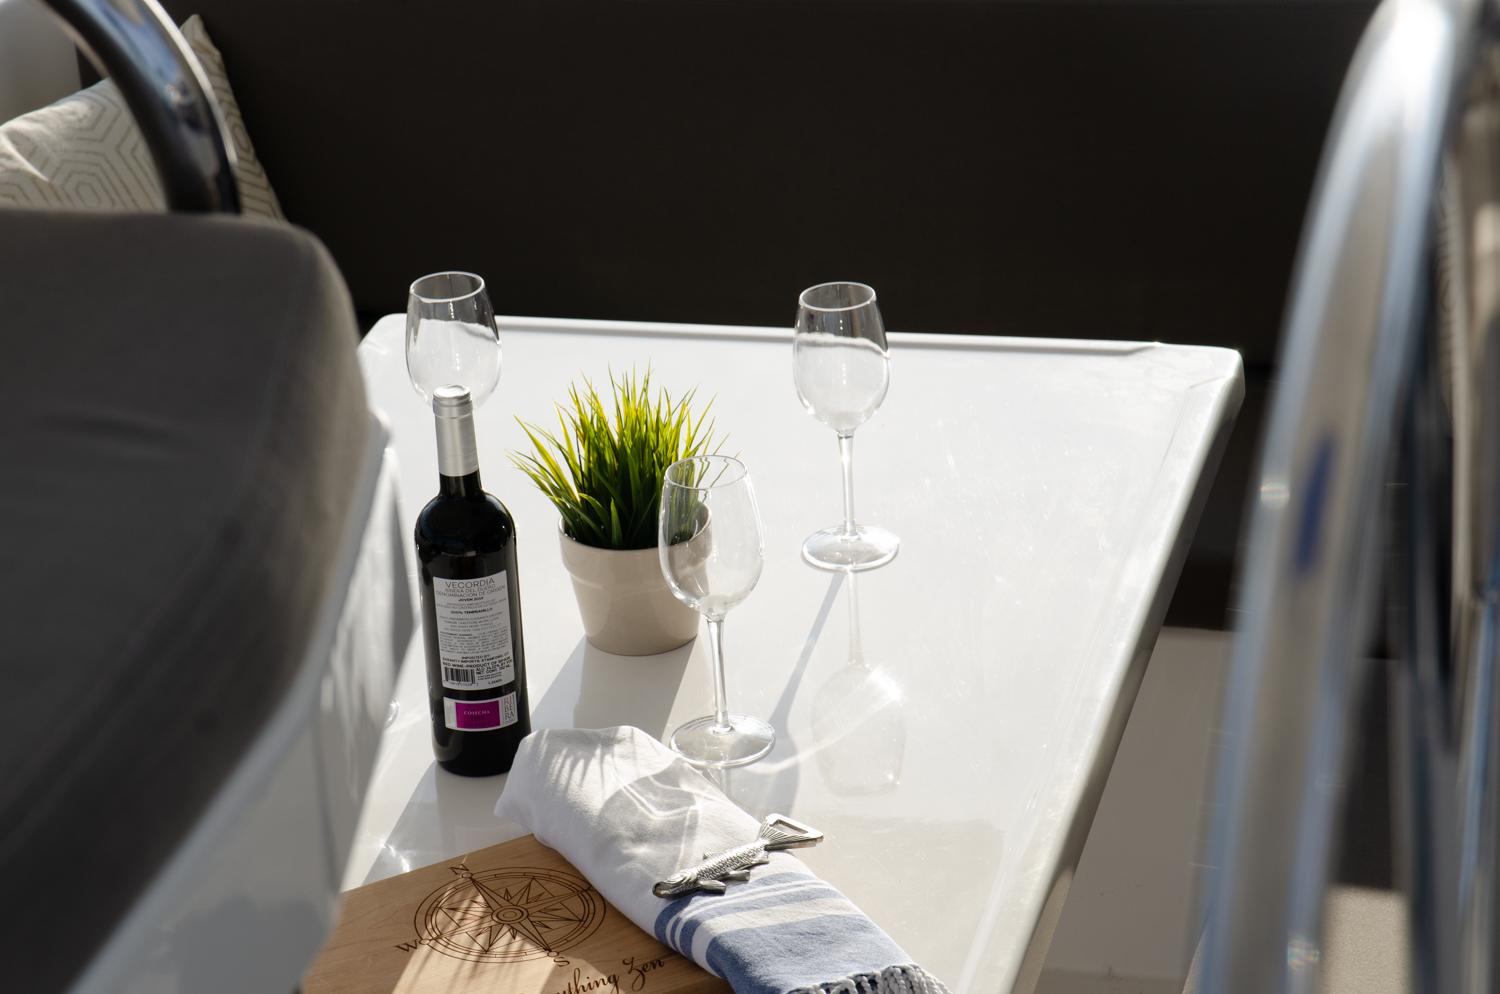 A bottle of wine and glasses on the aft table.